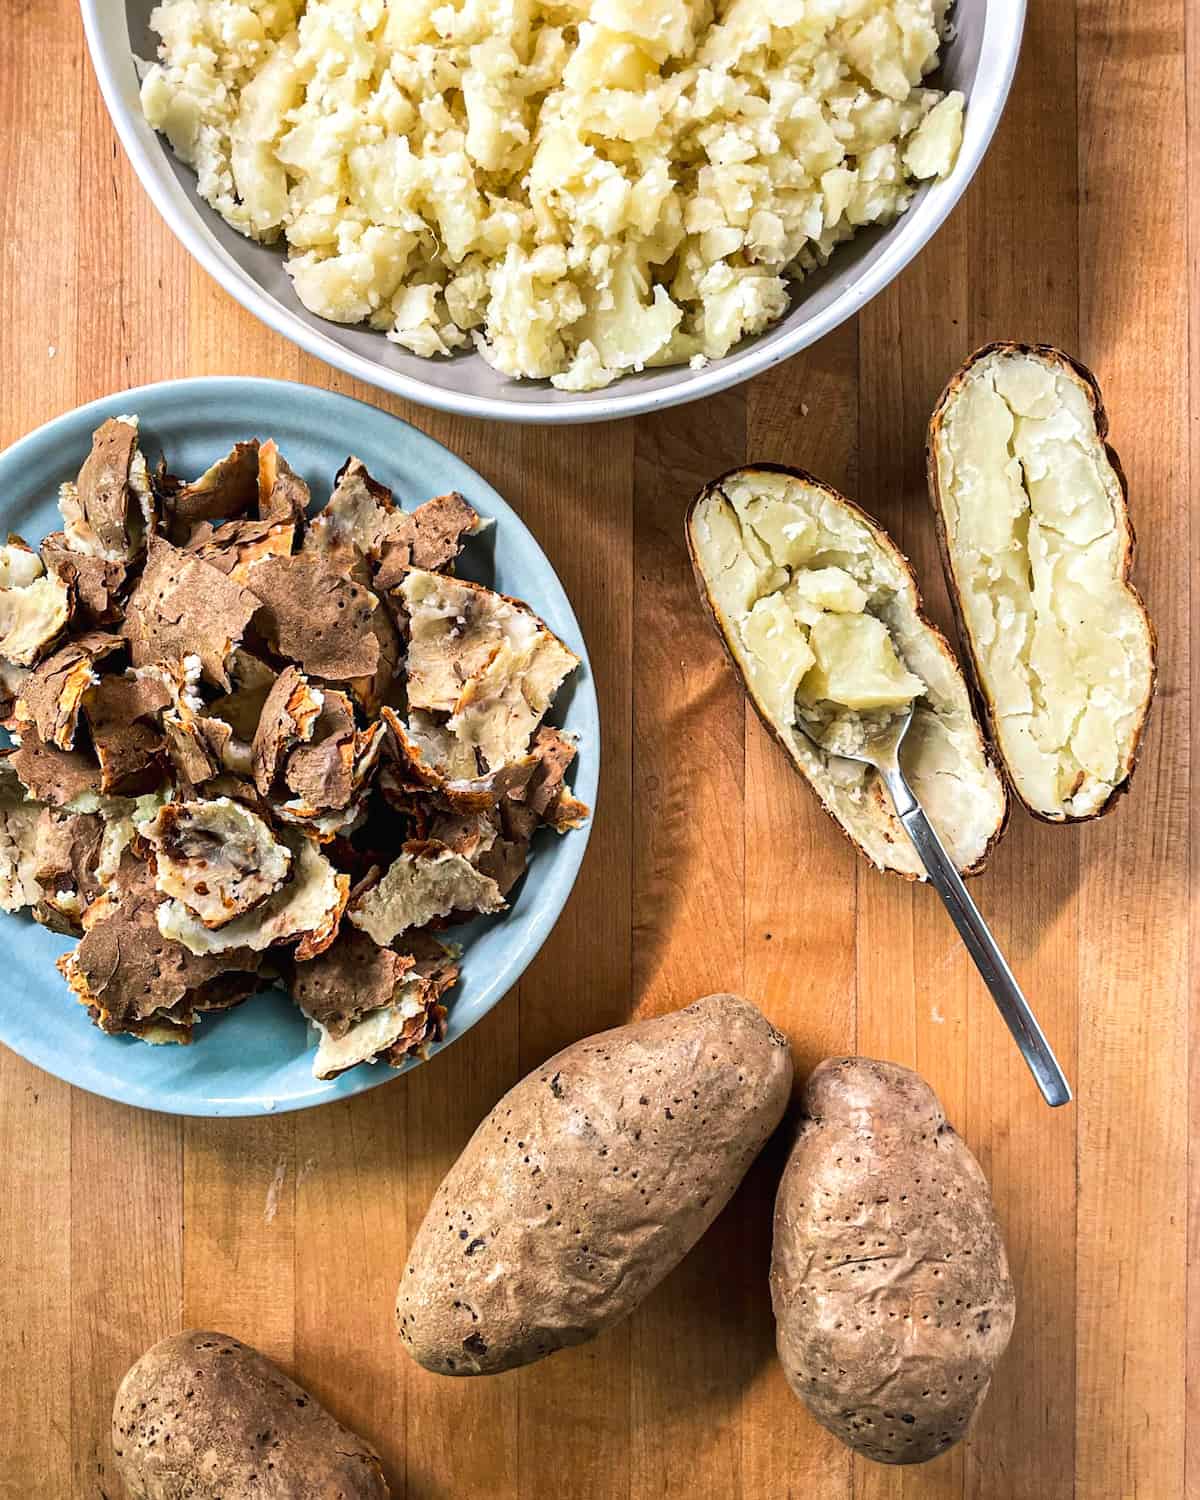 4 Baked russet potatoes with one halved and scooped out next to a large bowl of roughly chopped potato insides and a bowl of potato skins beside.